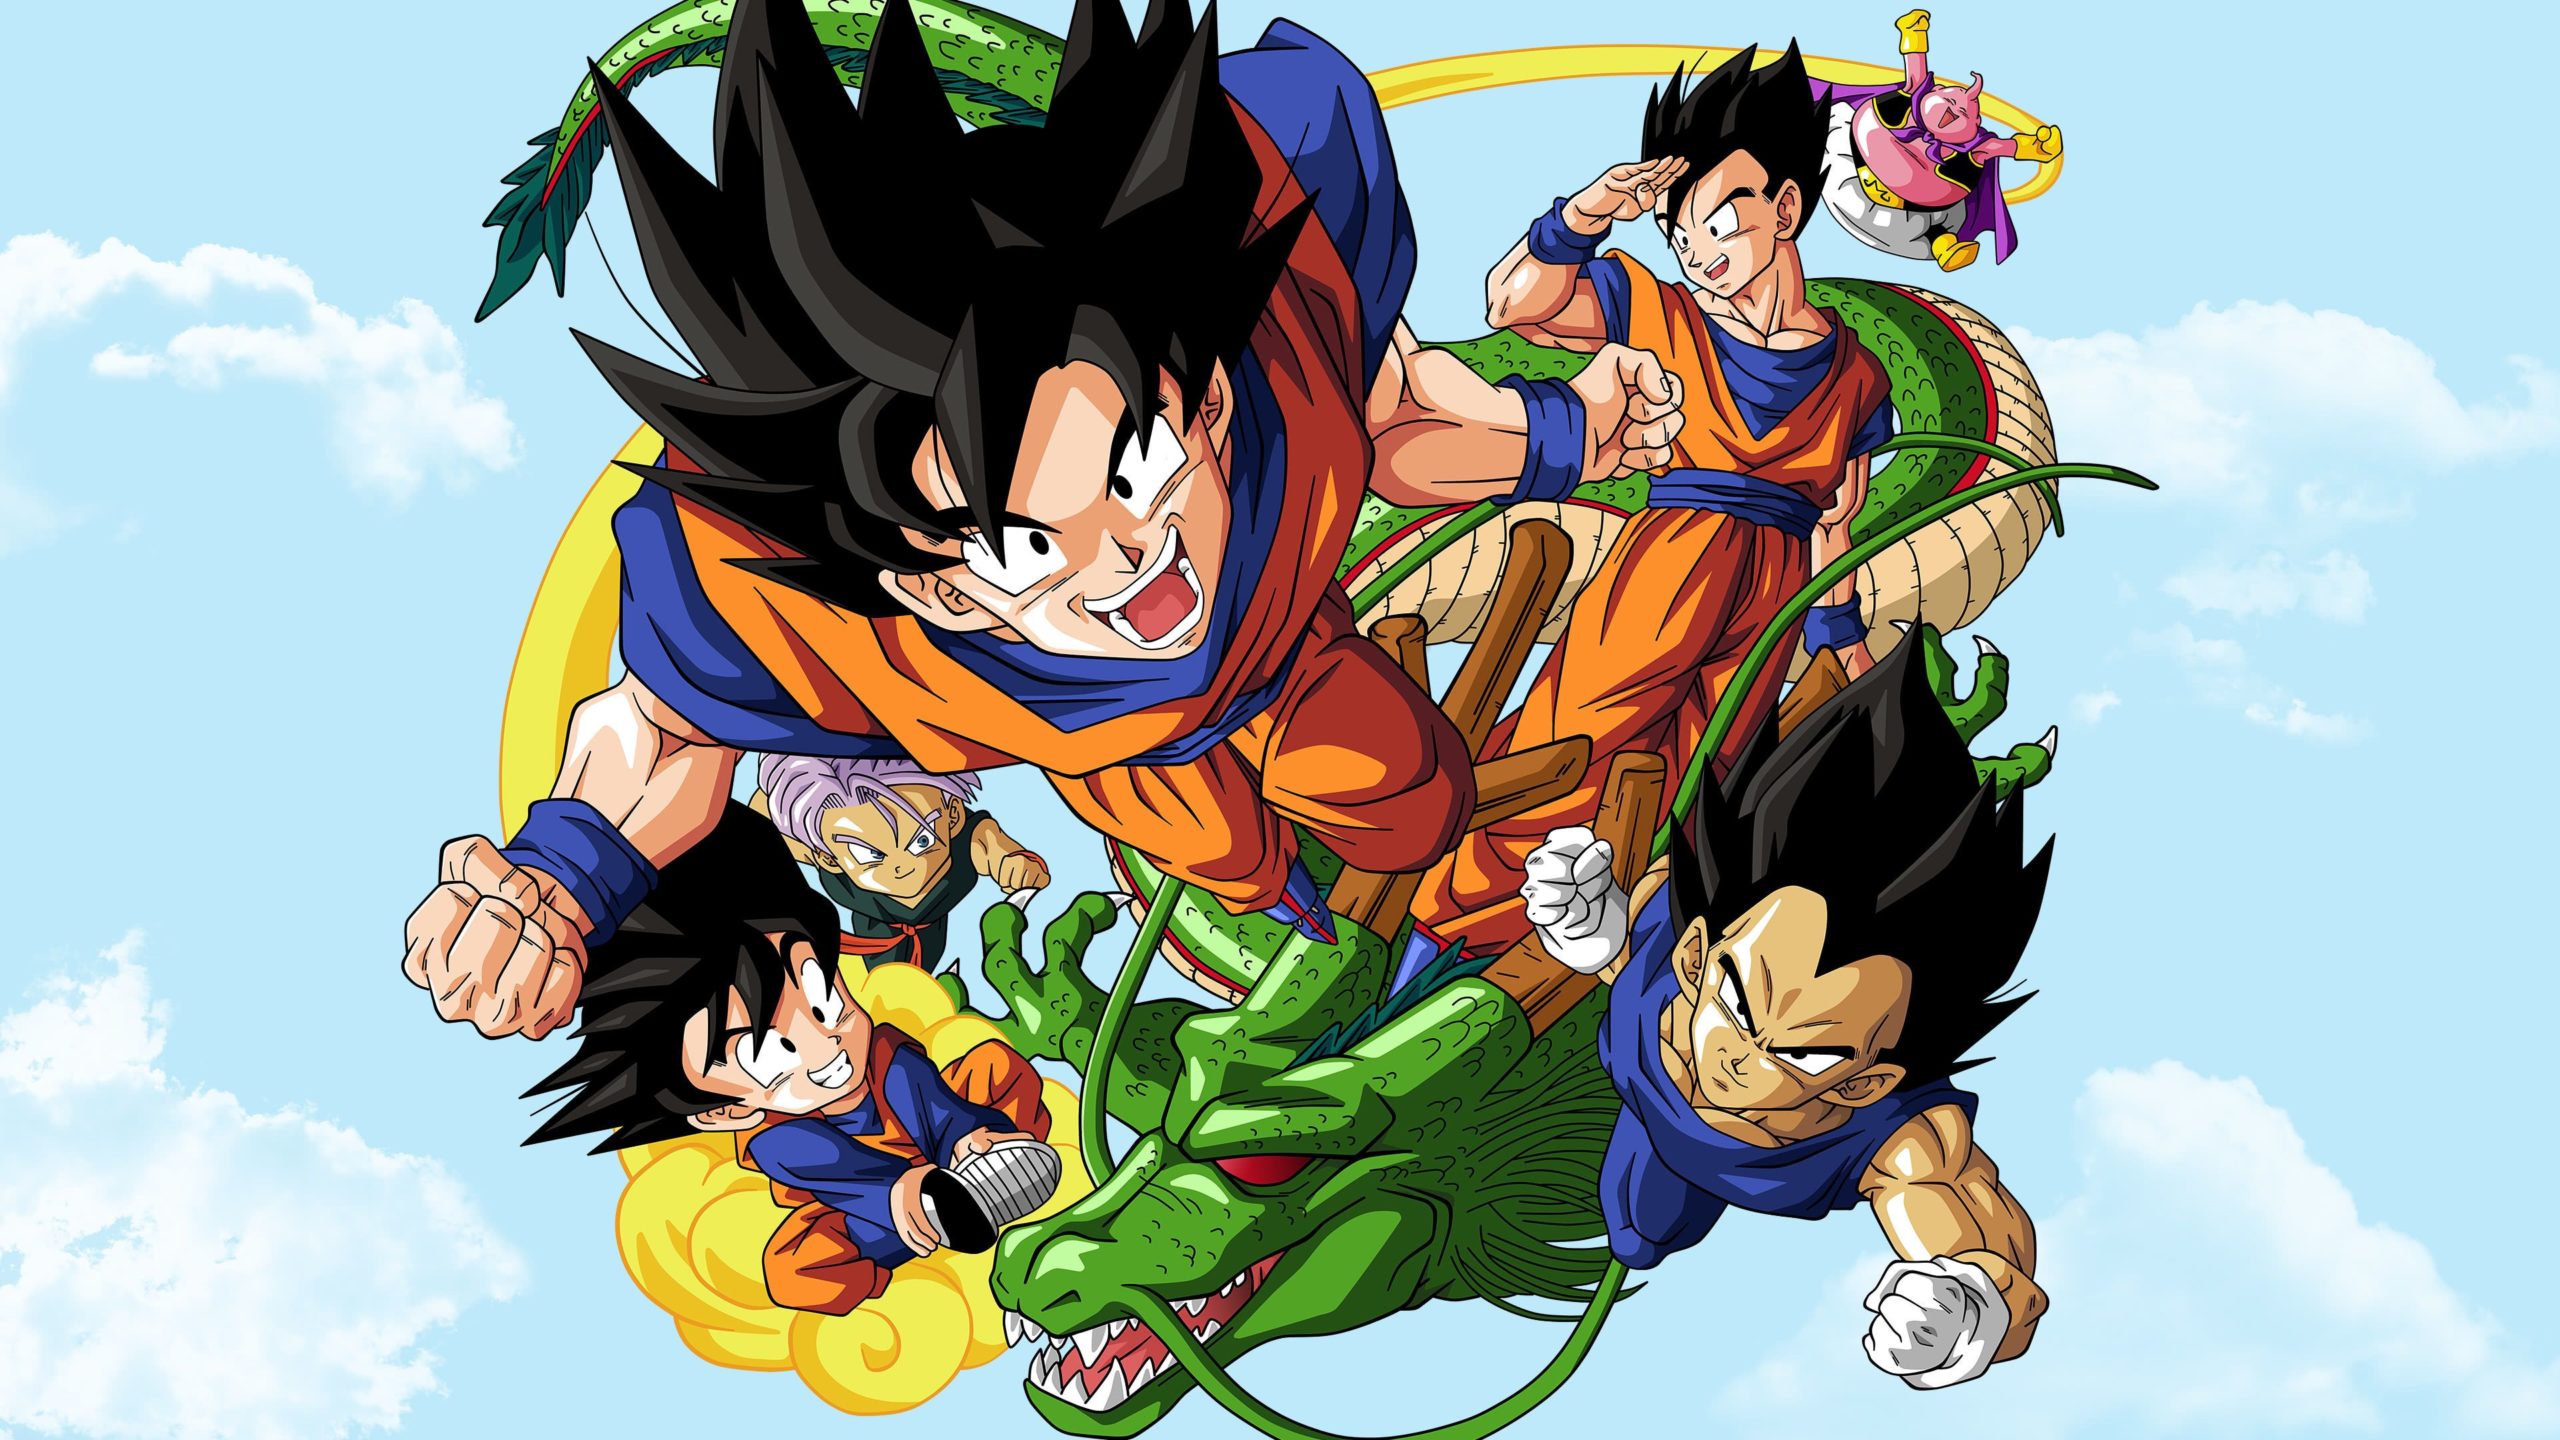 Can't find a 4k Dragon Ball wallpaper that I like, so I quickly